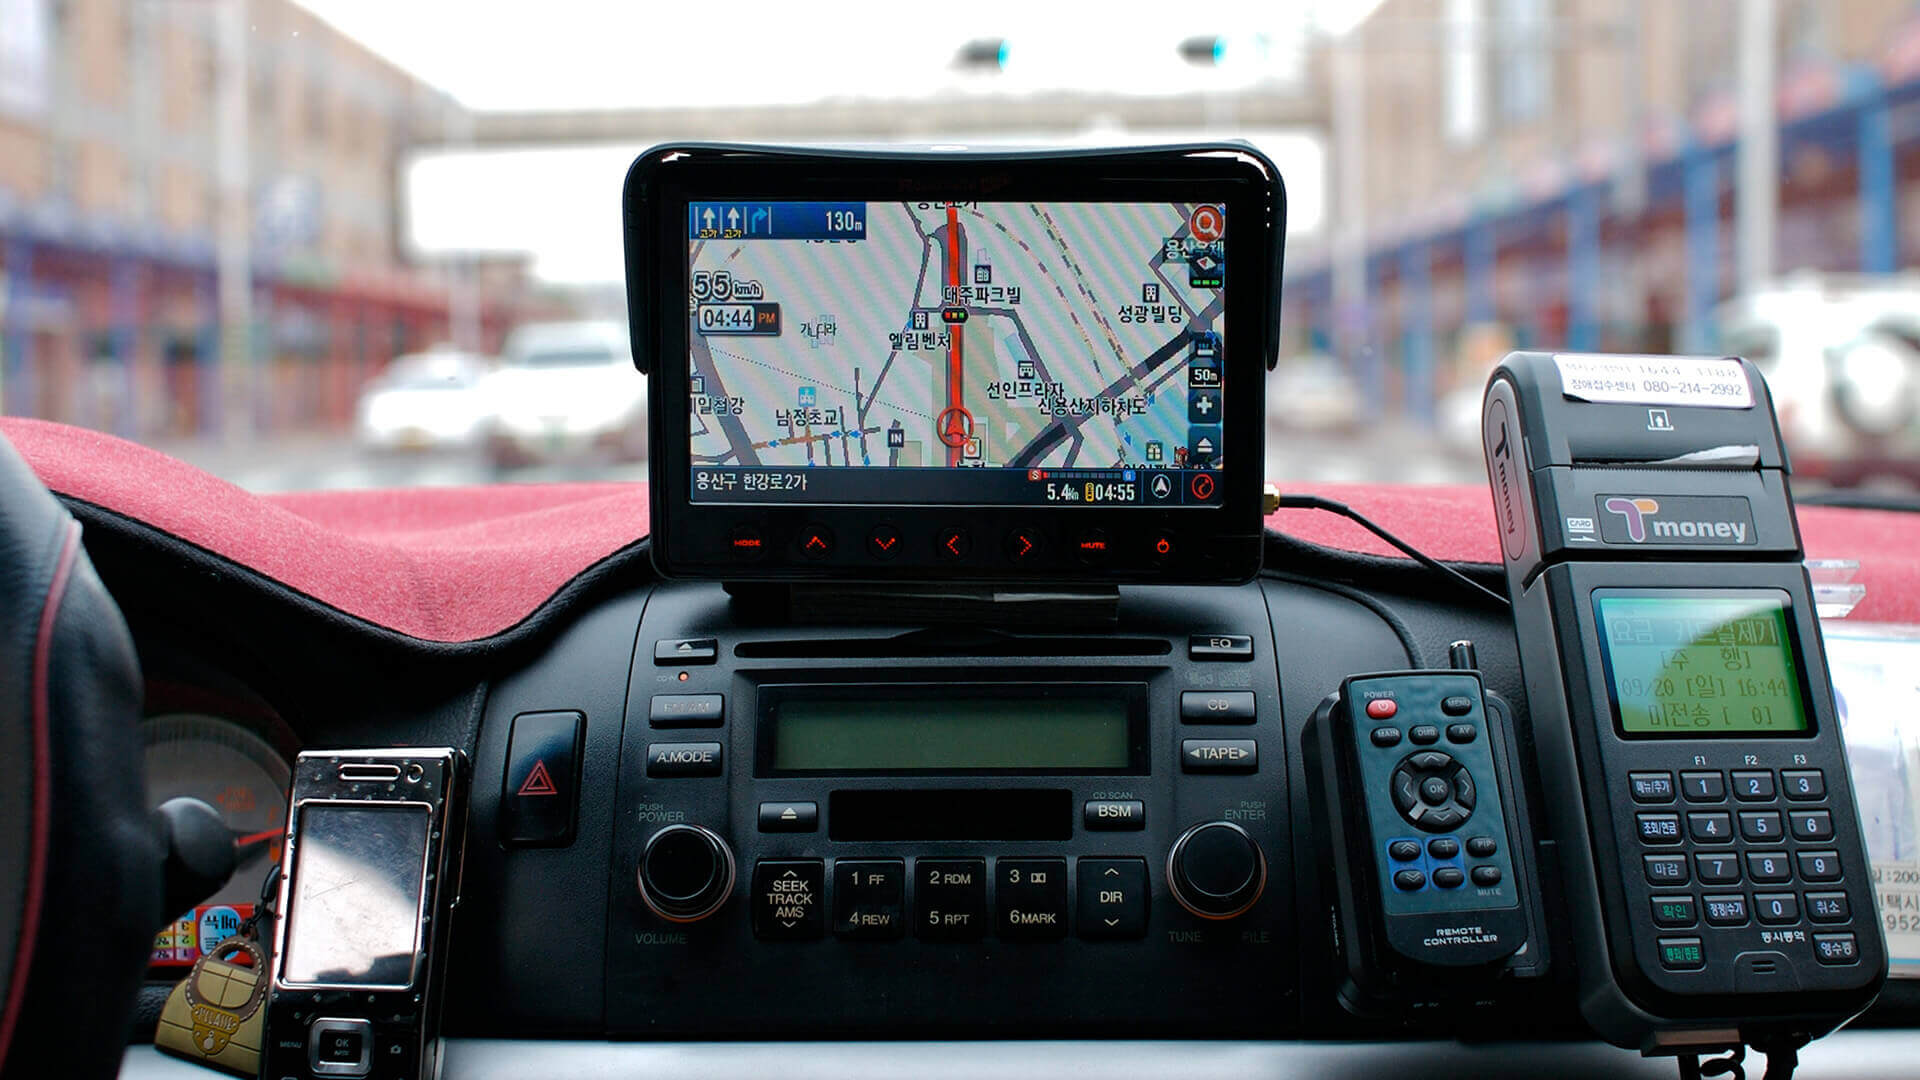 Navigation System Market is set for a Potential Growth Worldwide: Excellent Technology Trends with Business Analysis 